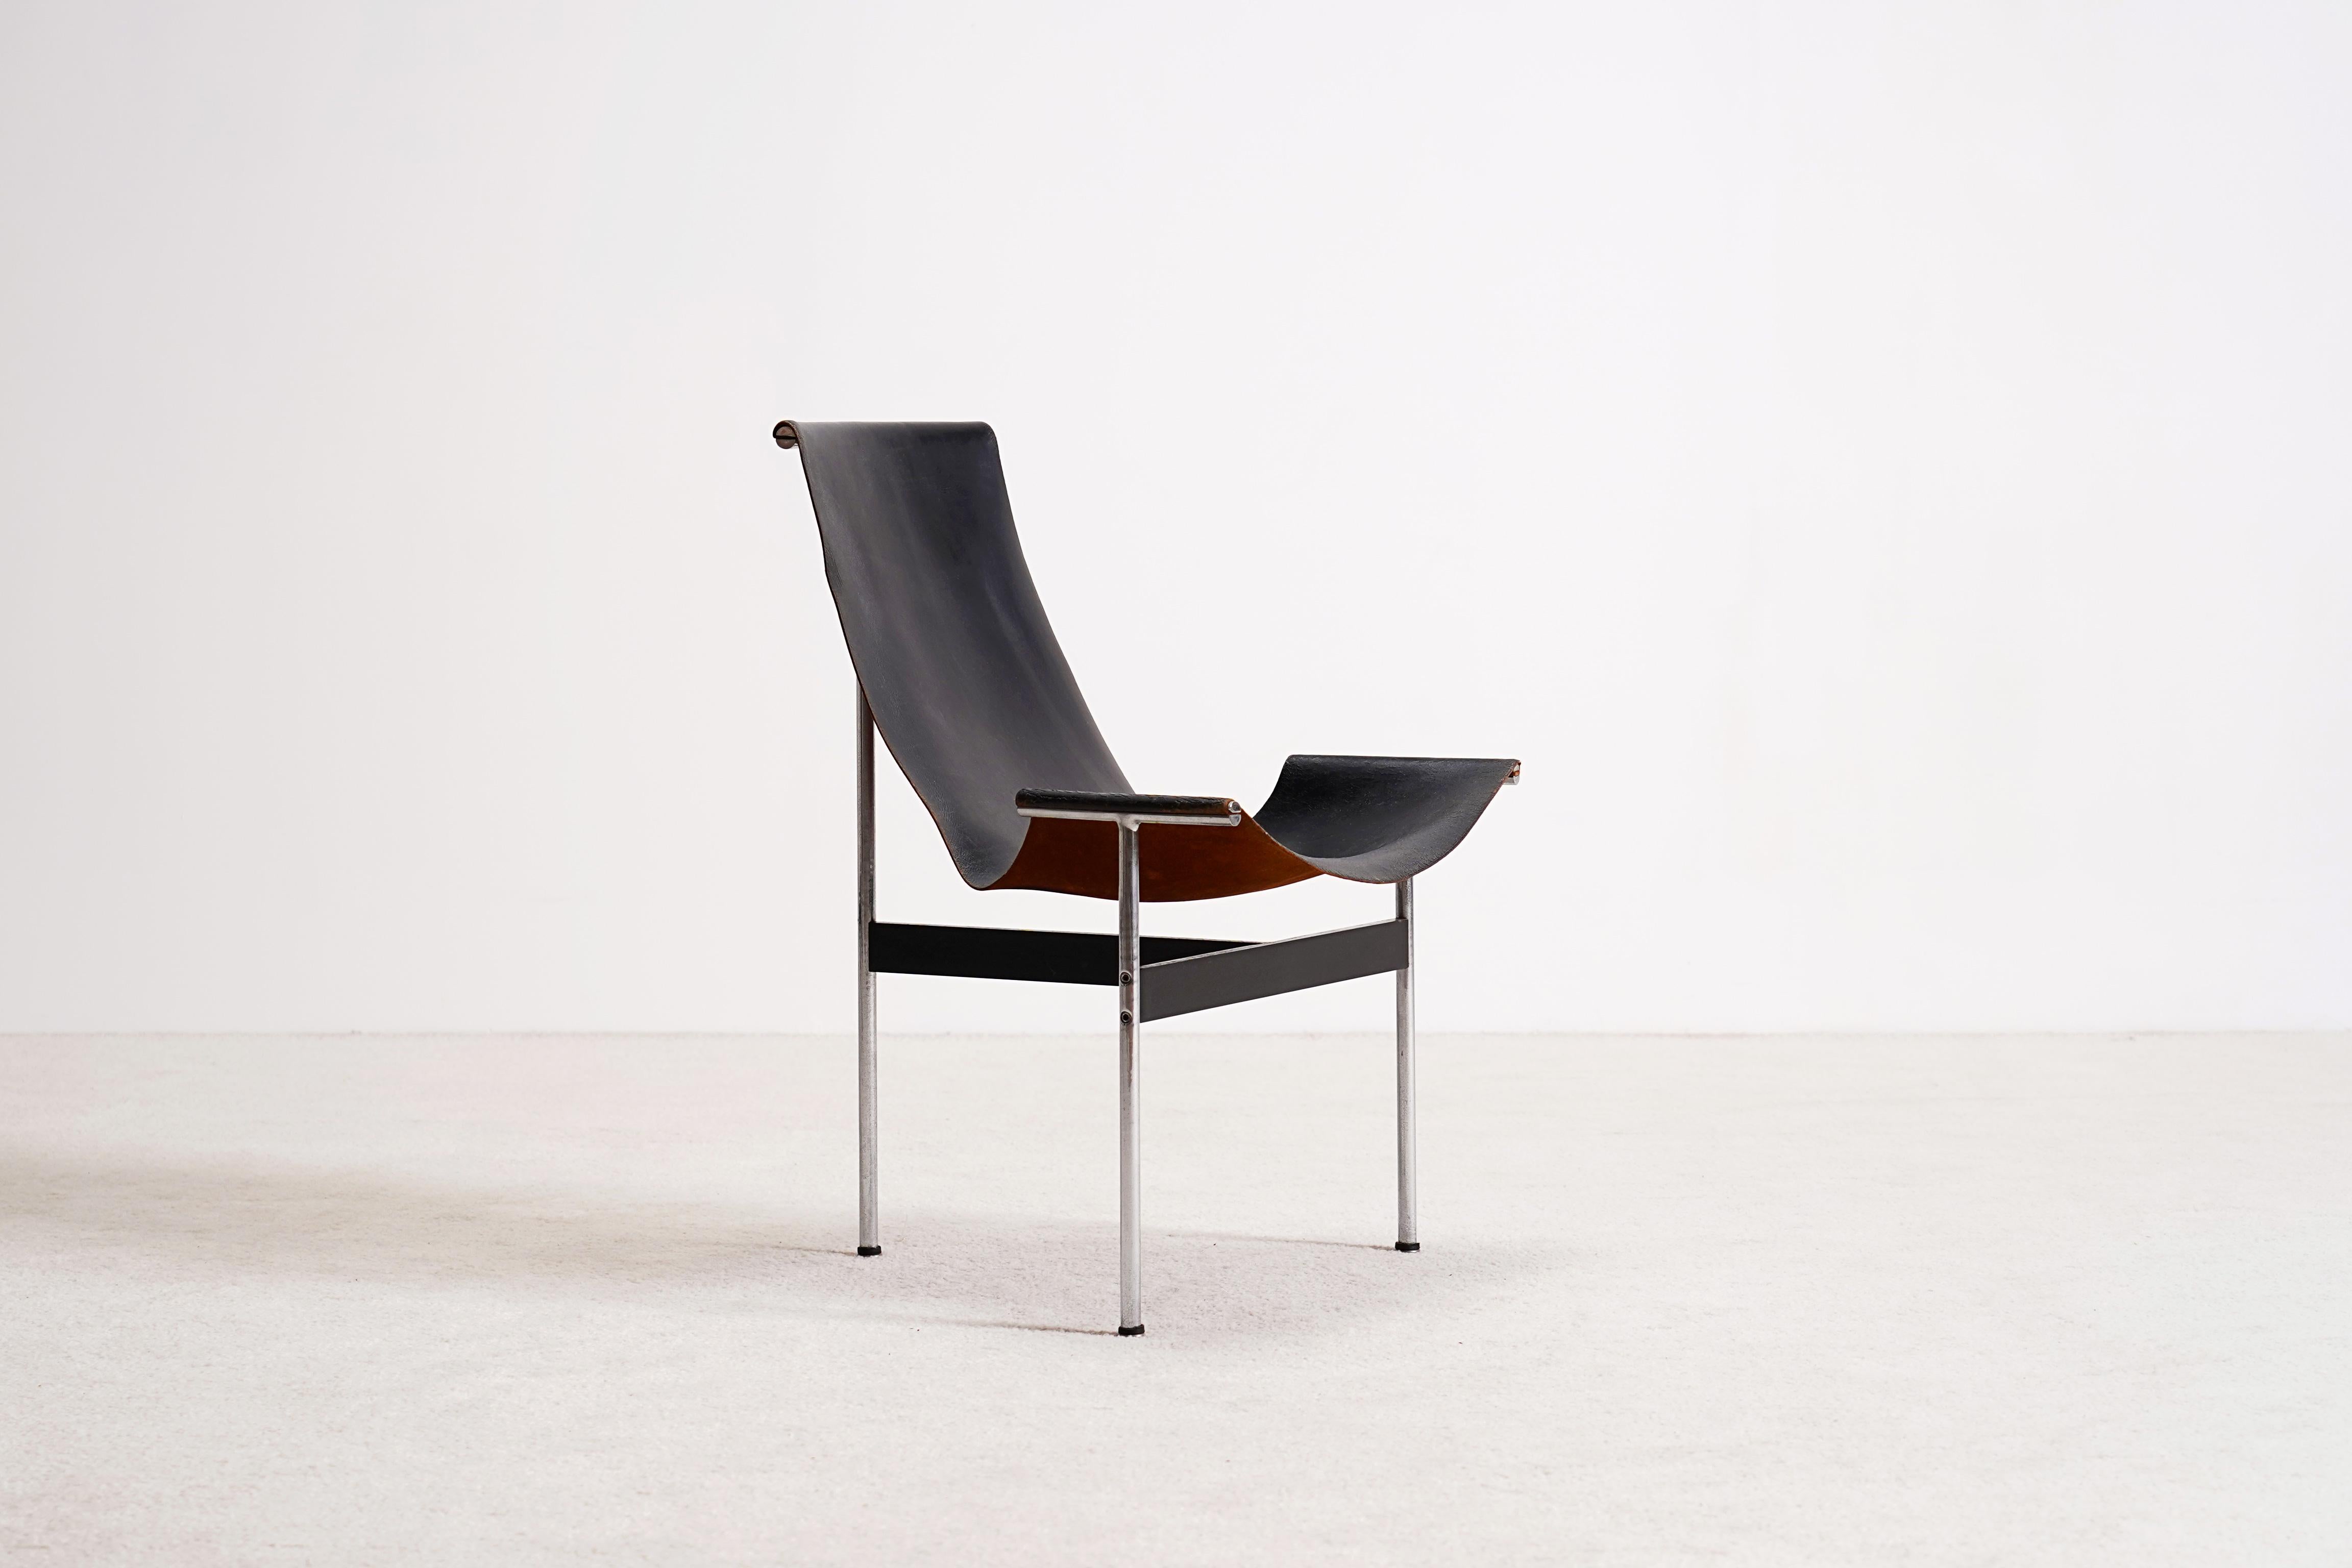 Single three-legged chairs, model T-Chair, designed by Katavolos, Kelley and Littell in 1952 / 1953. Three T-shaped steel legs hold the black leather in place. The leather is connected to the frame on three points only resulting in an elegant